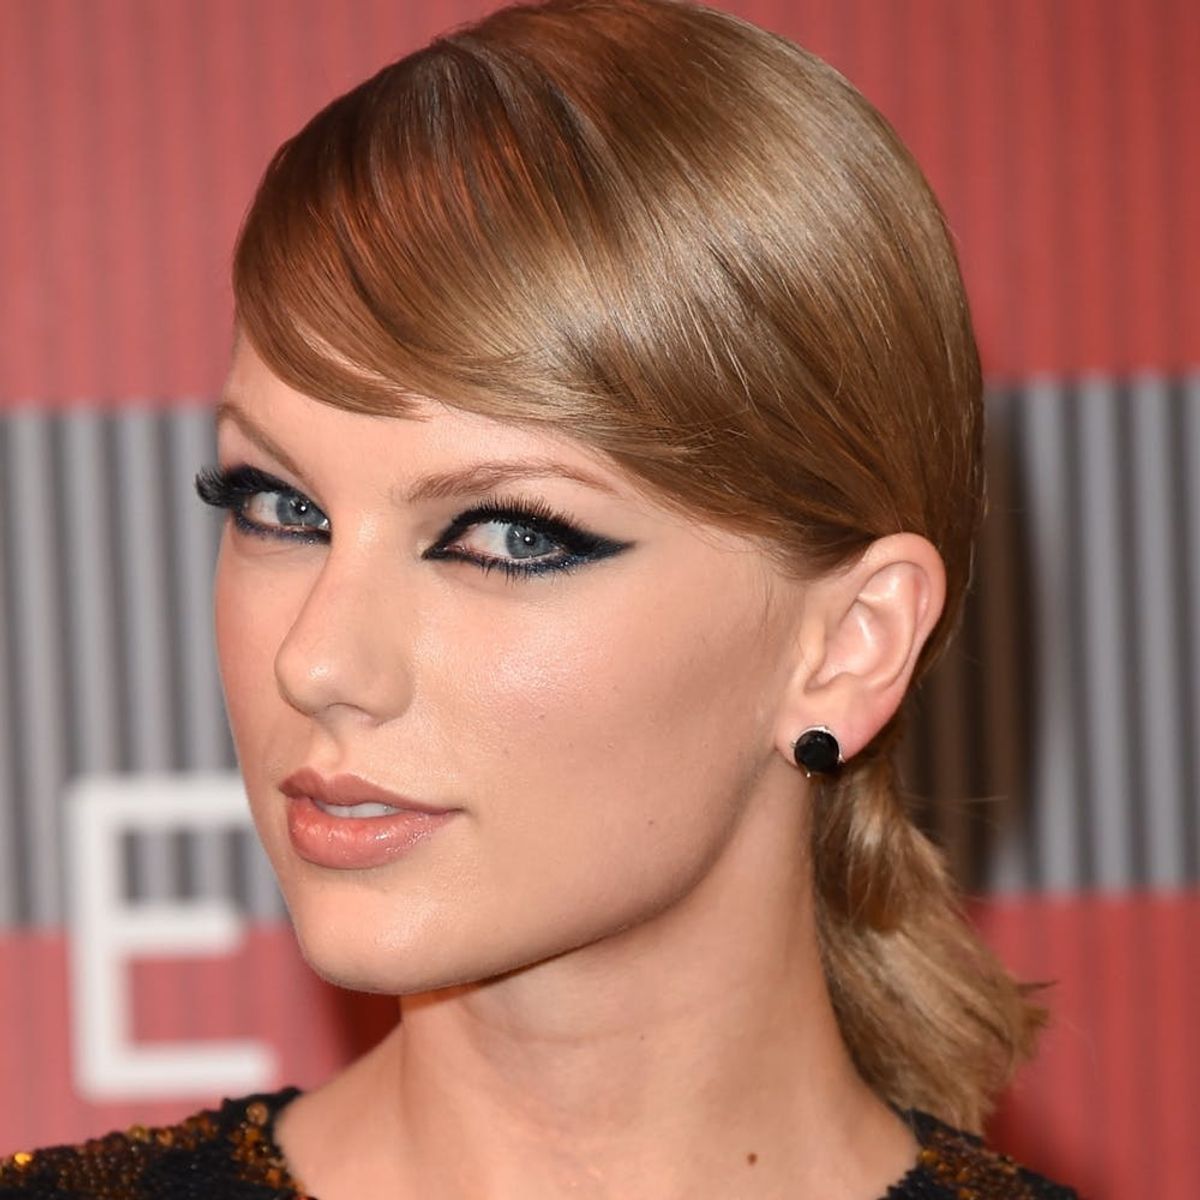 Taylor Swift Is Treating Herself To Some (Seriously Adorable) Downtime